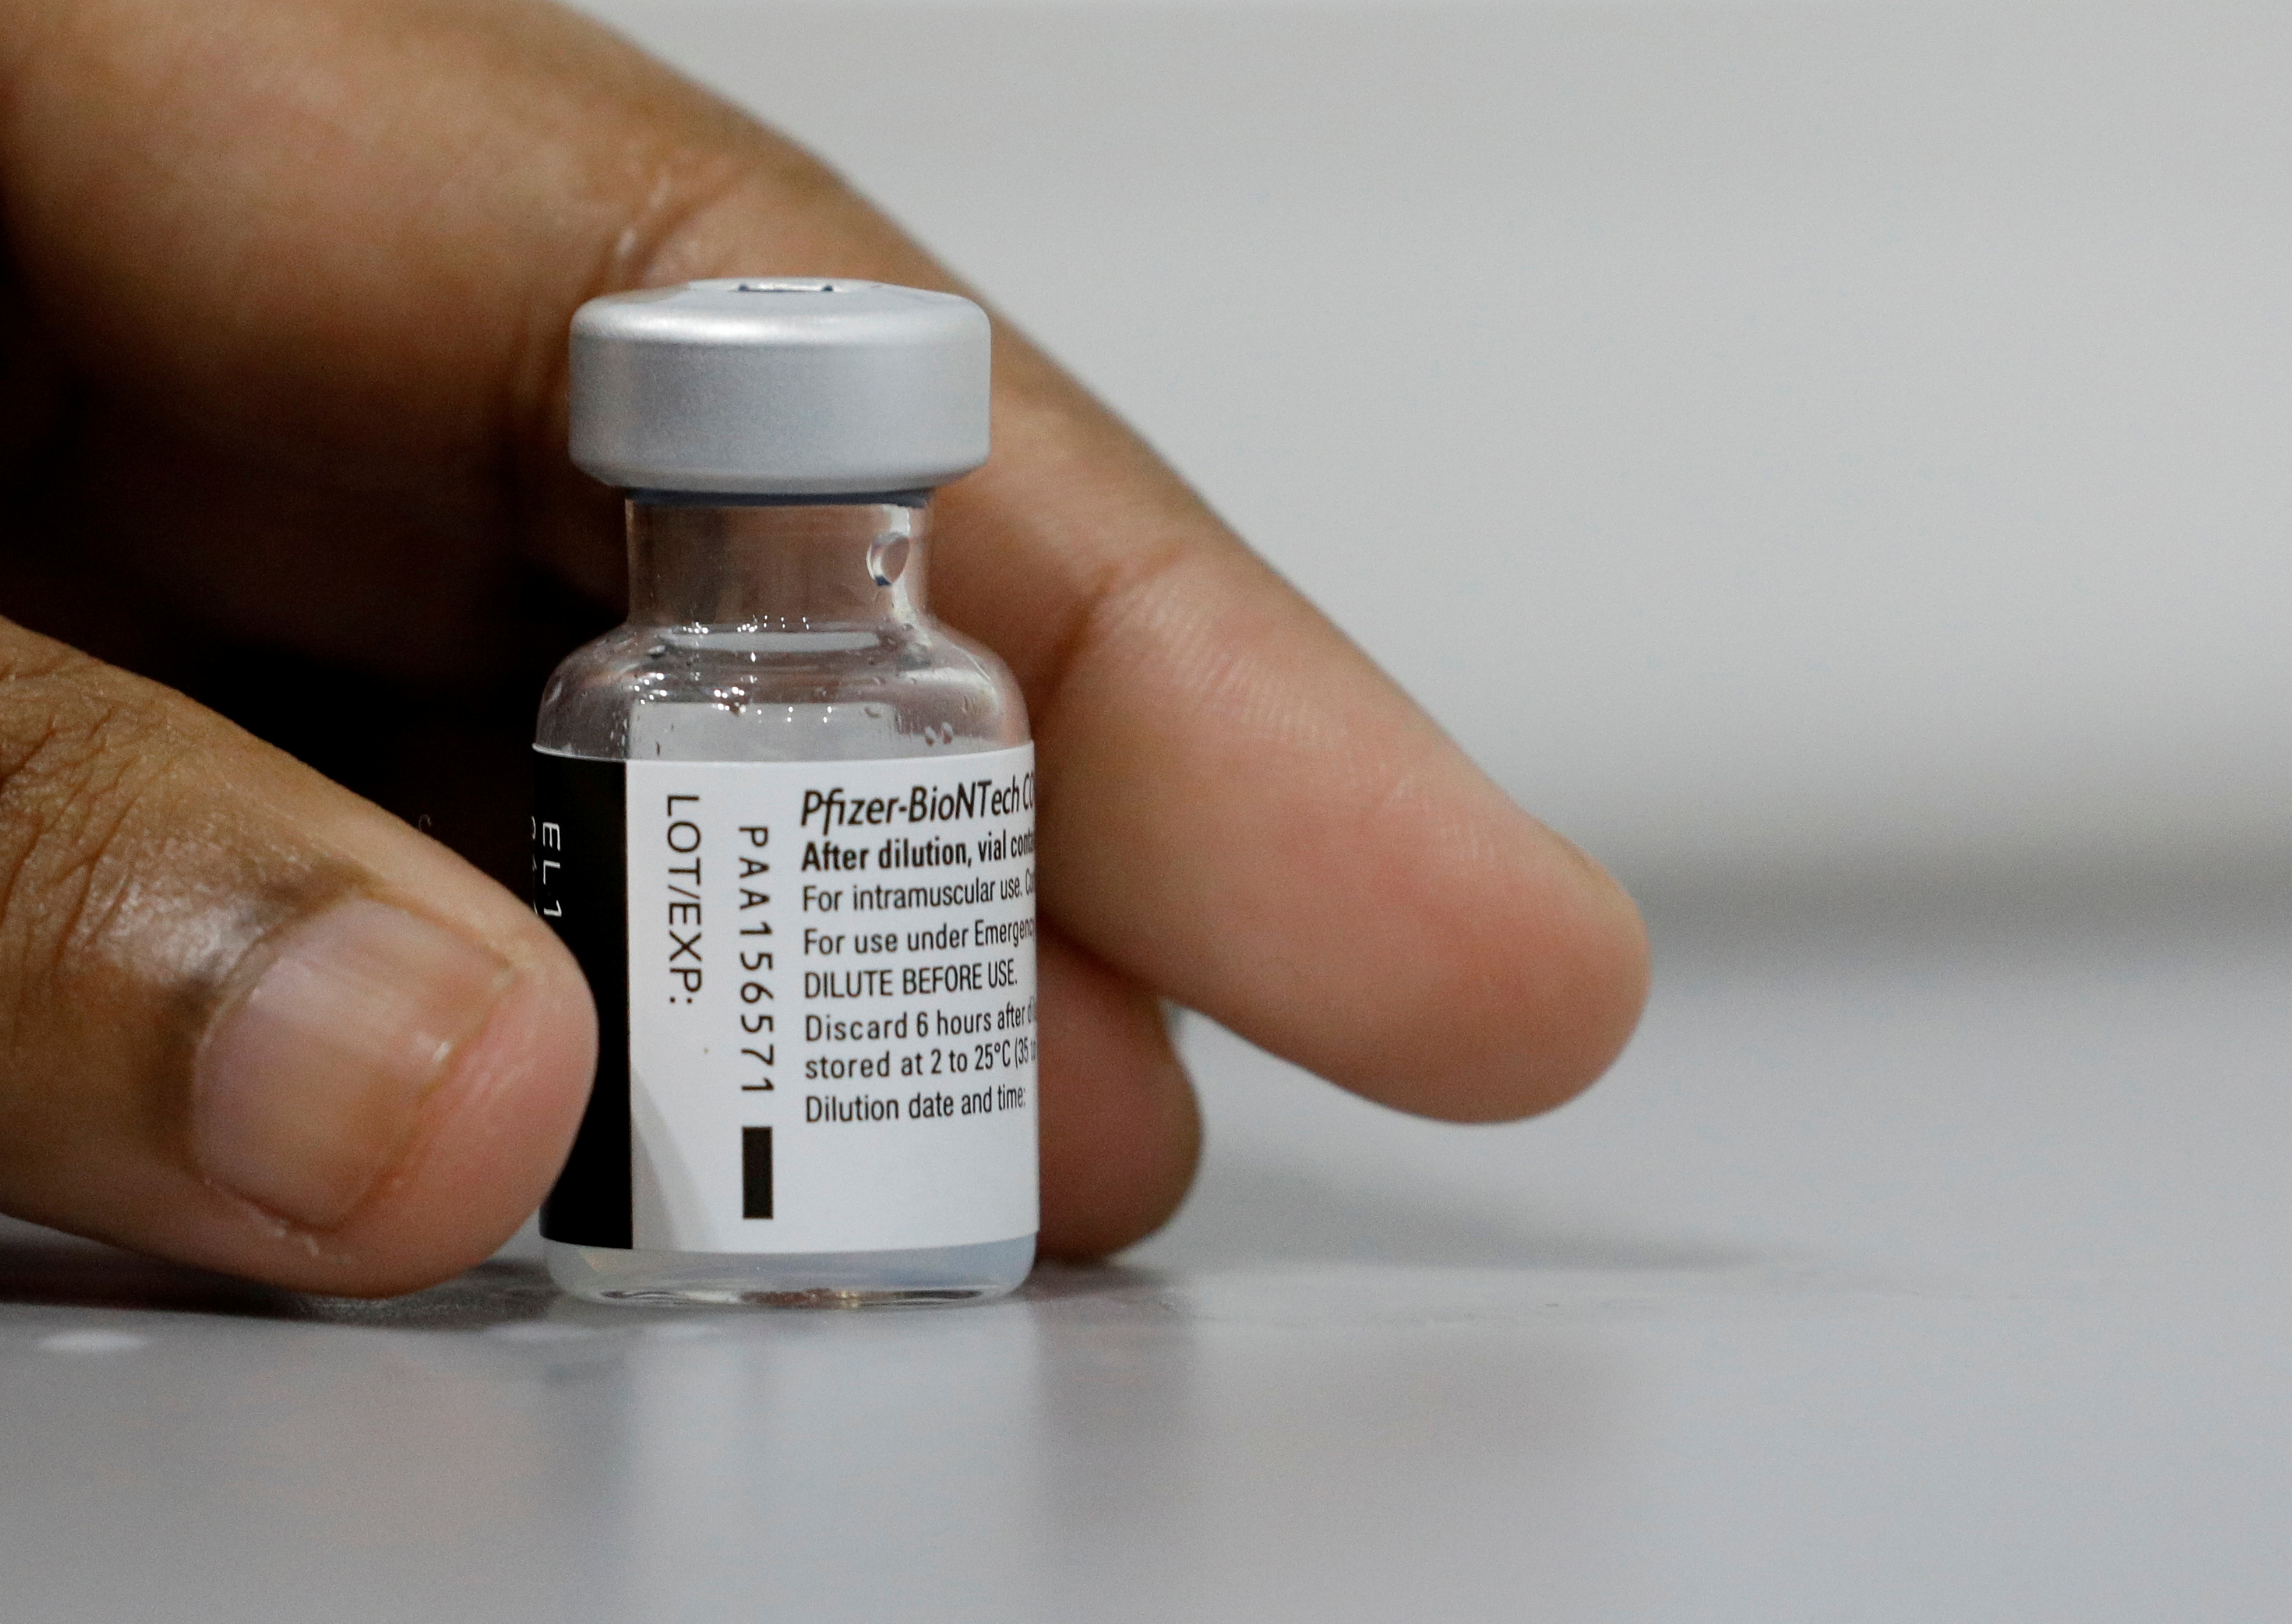 A medical worker prepares to dilute a vial of Pfizer-BioNTech vaccine at a coronavirus disease (COVID-19) vaccination center in Singapore